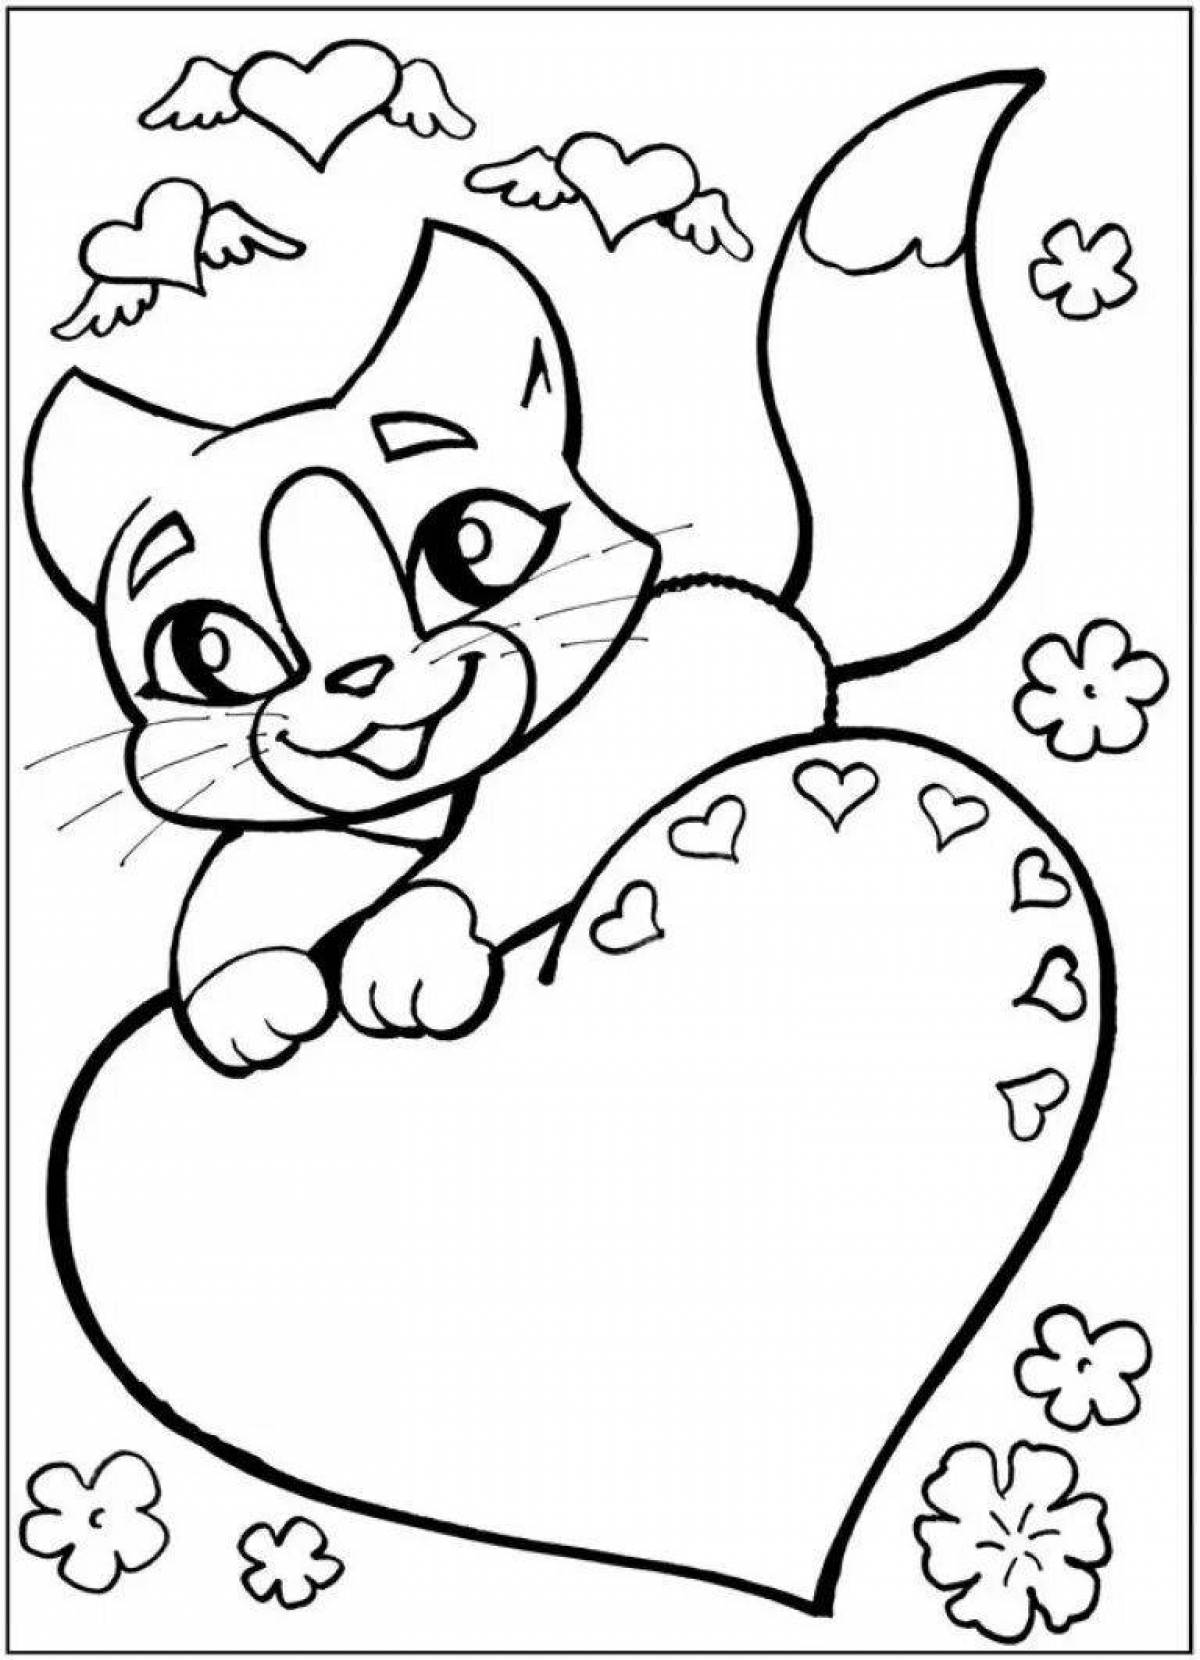 Fabulous Valentine's coloring pages for February 14th